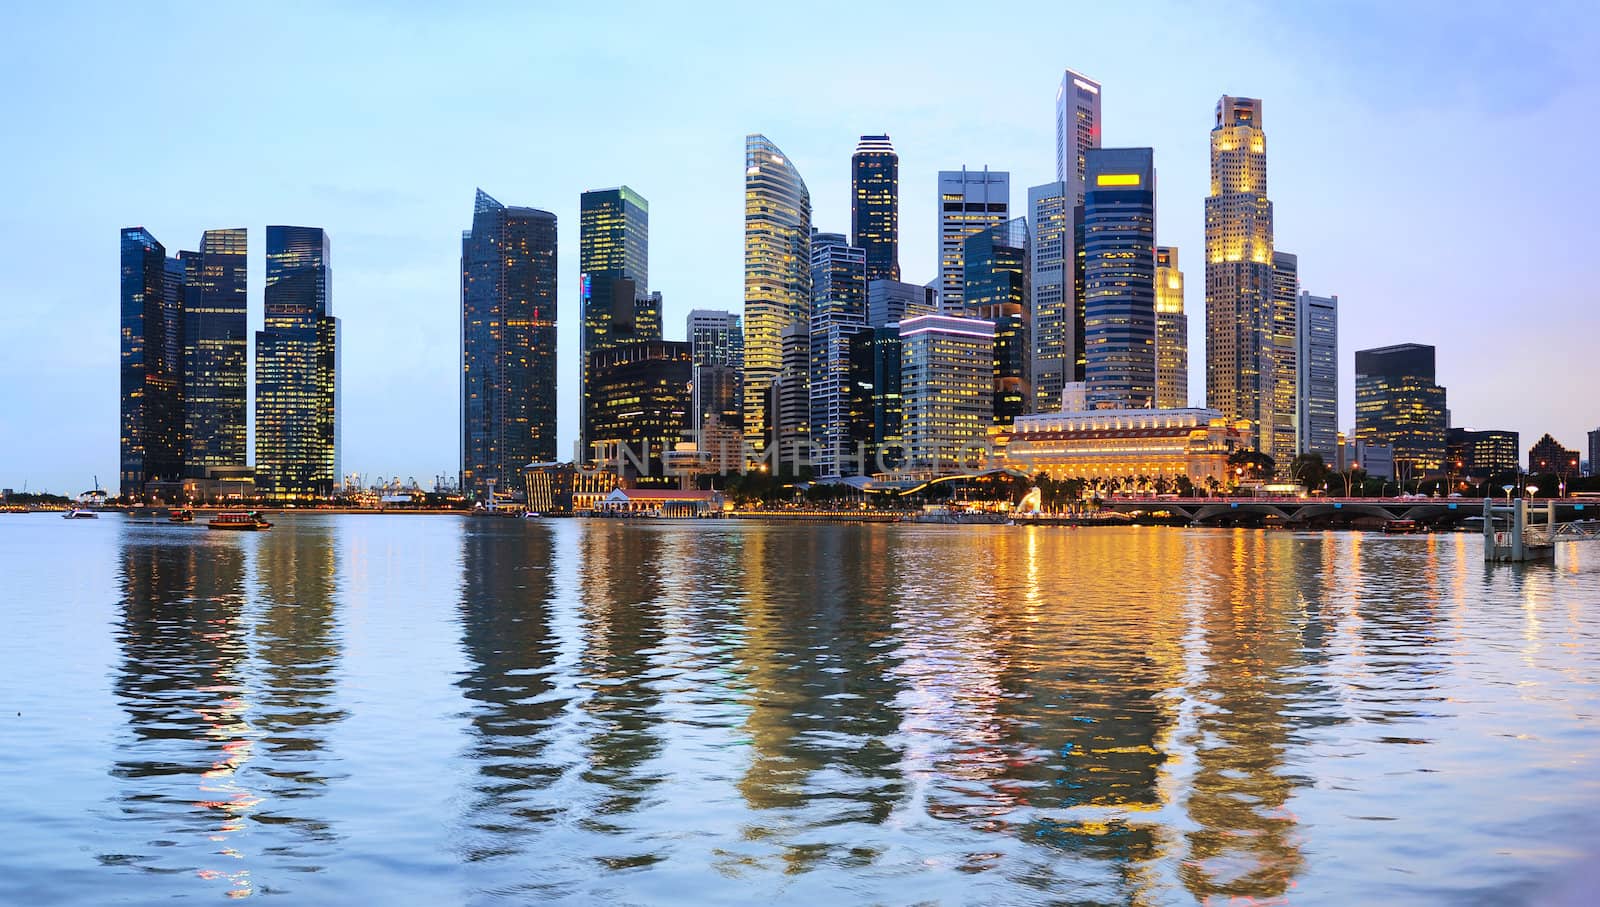 Panoramic view of Singapore at the colorful dusk